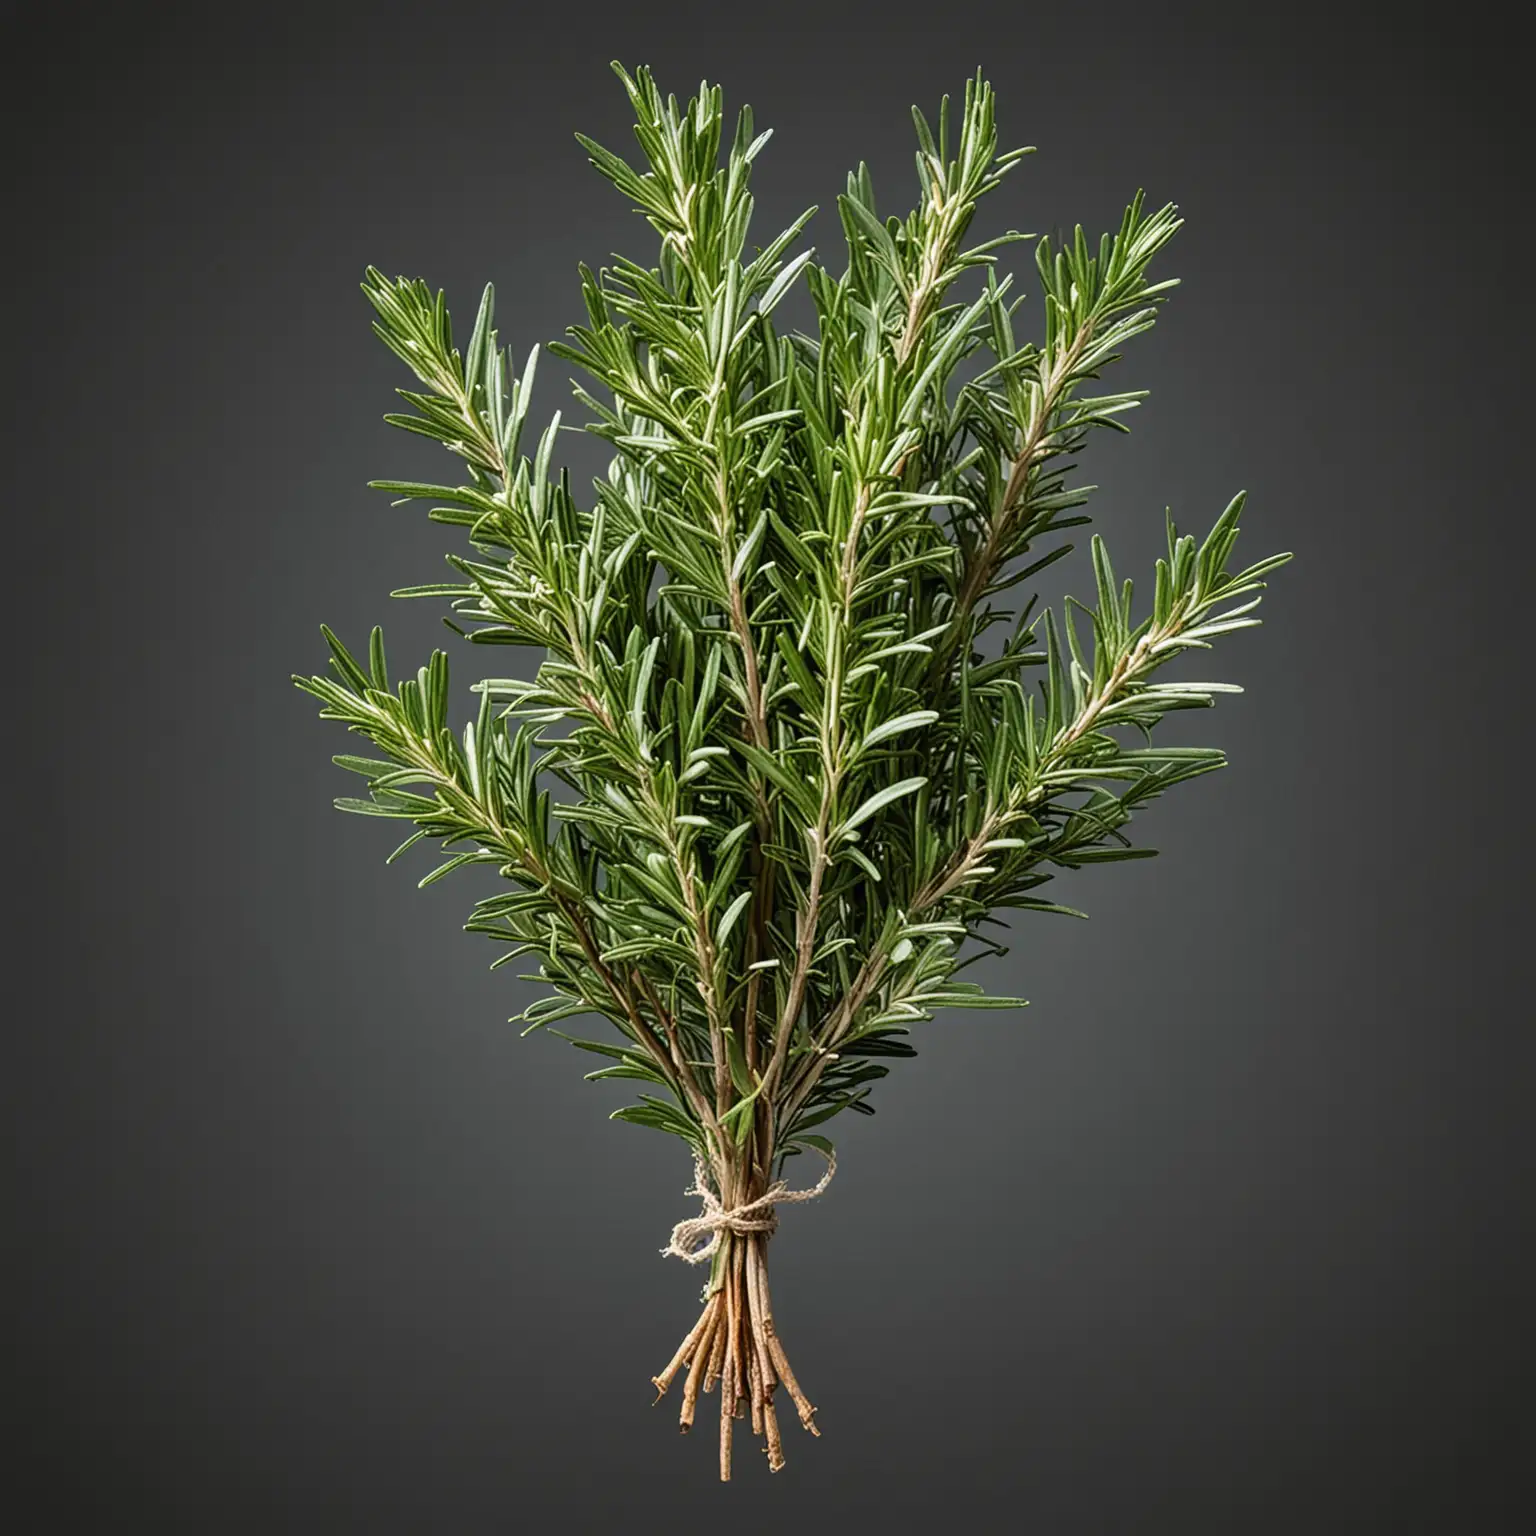 Bunch of Rosemary Plant with Minimalist Background